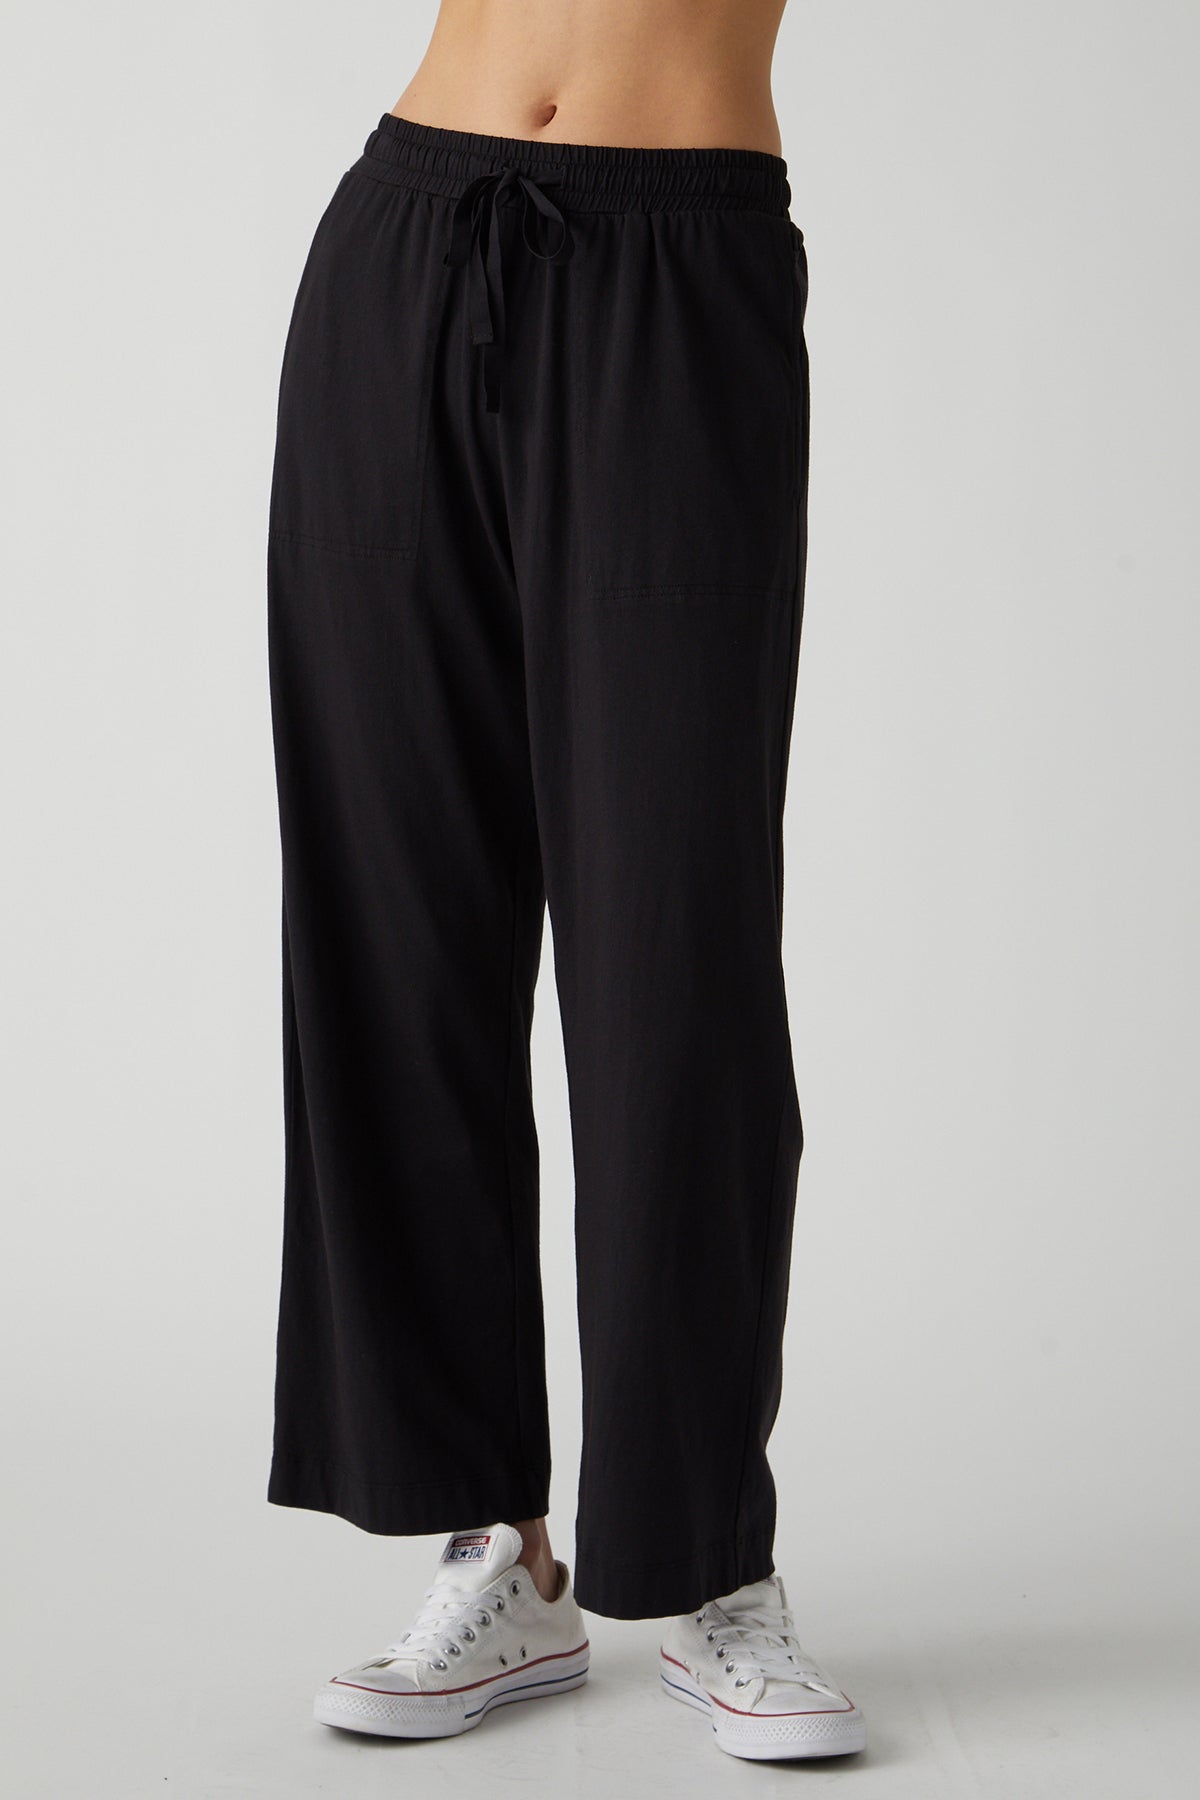   Pismo Pant in black front 